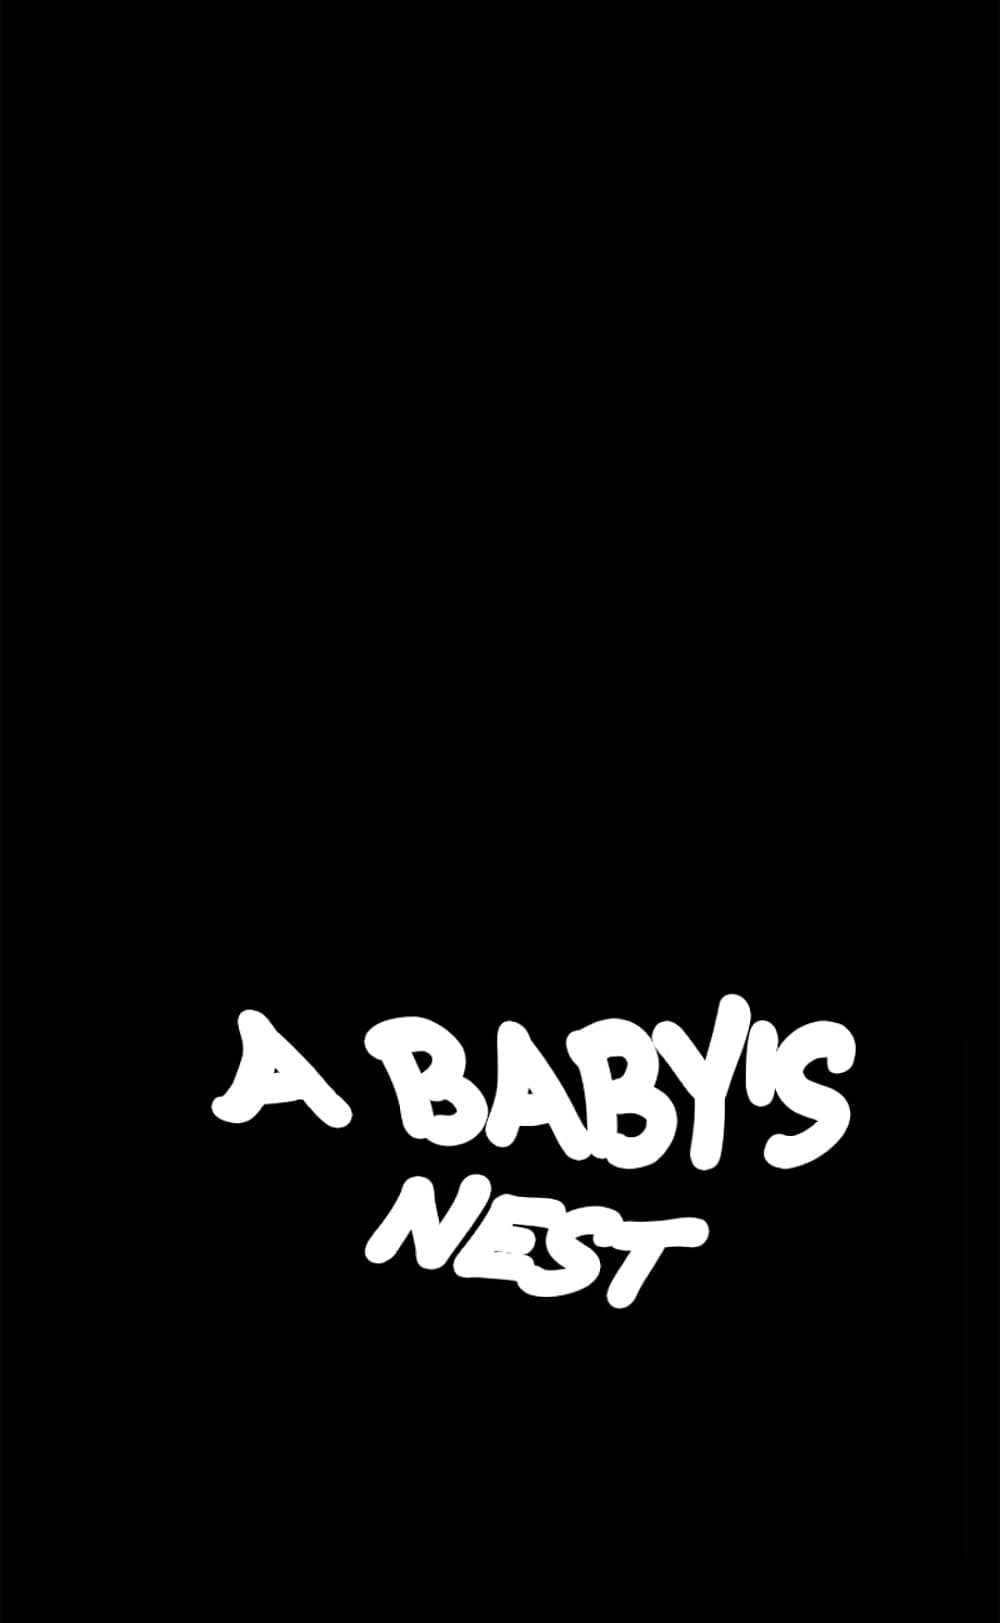 A Baby's Nest 8 (9)